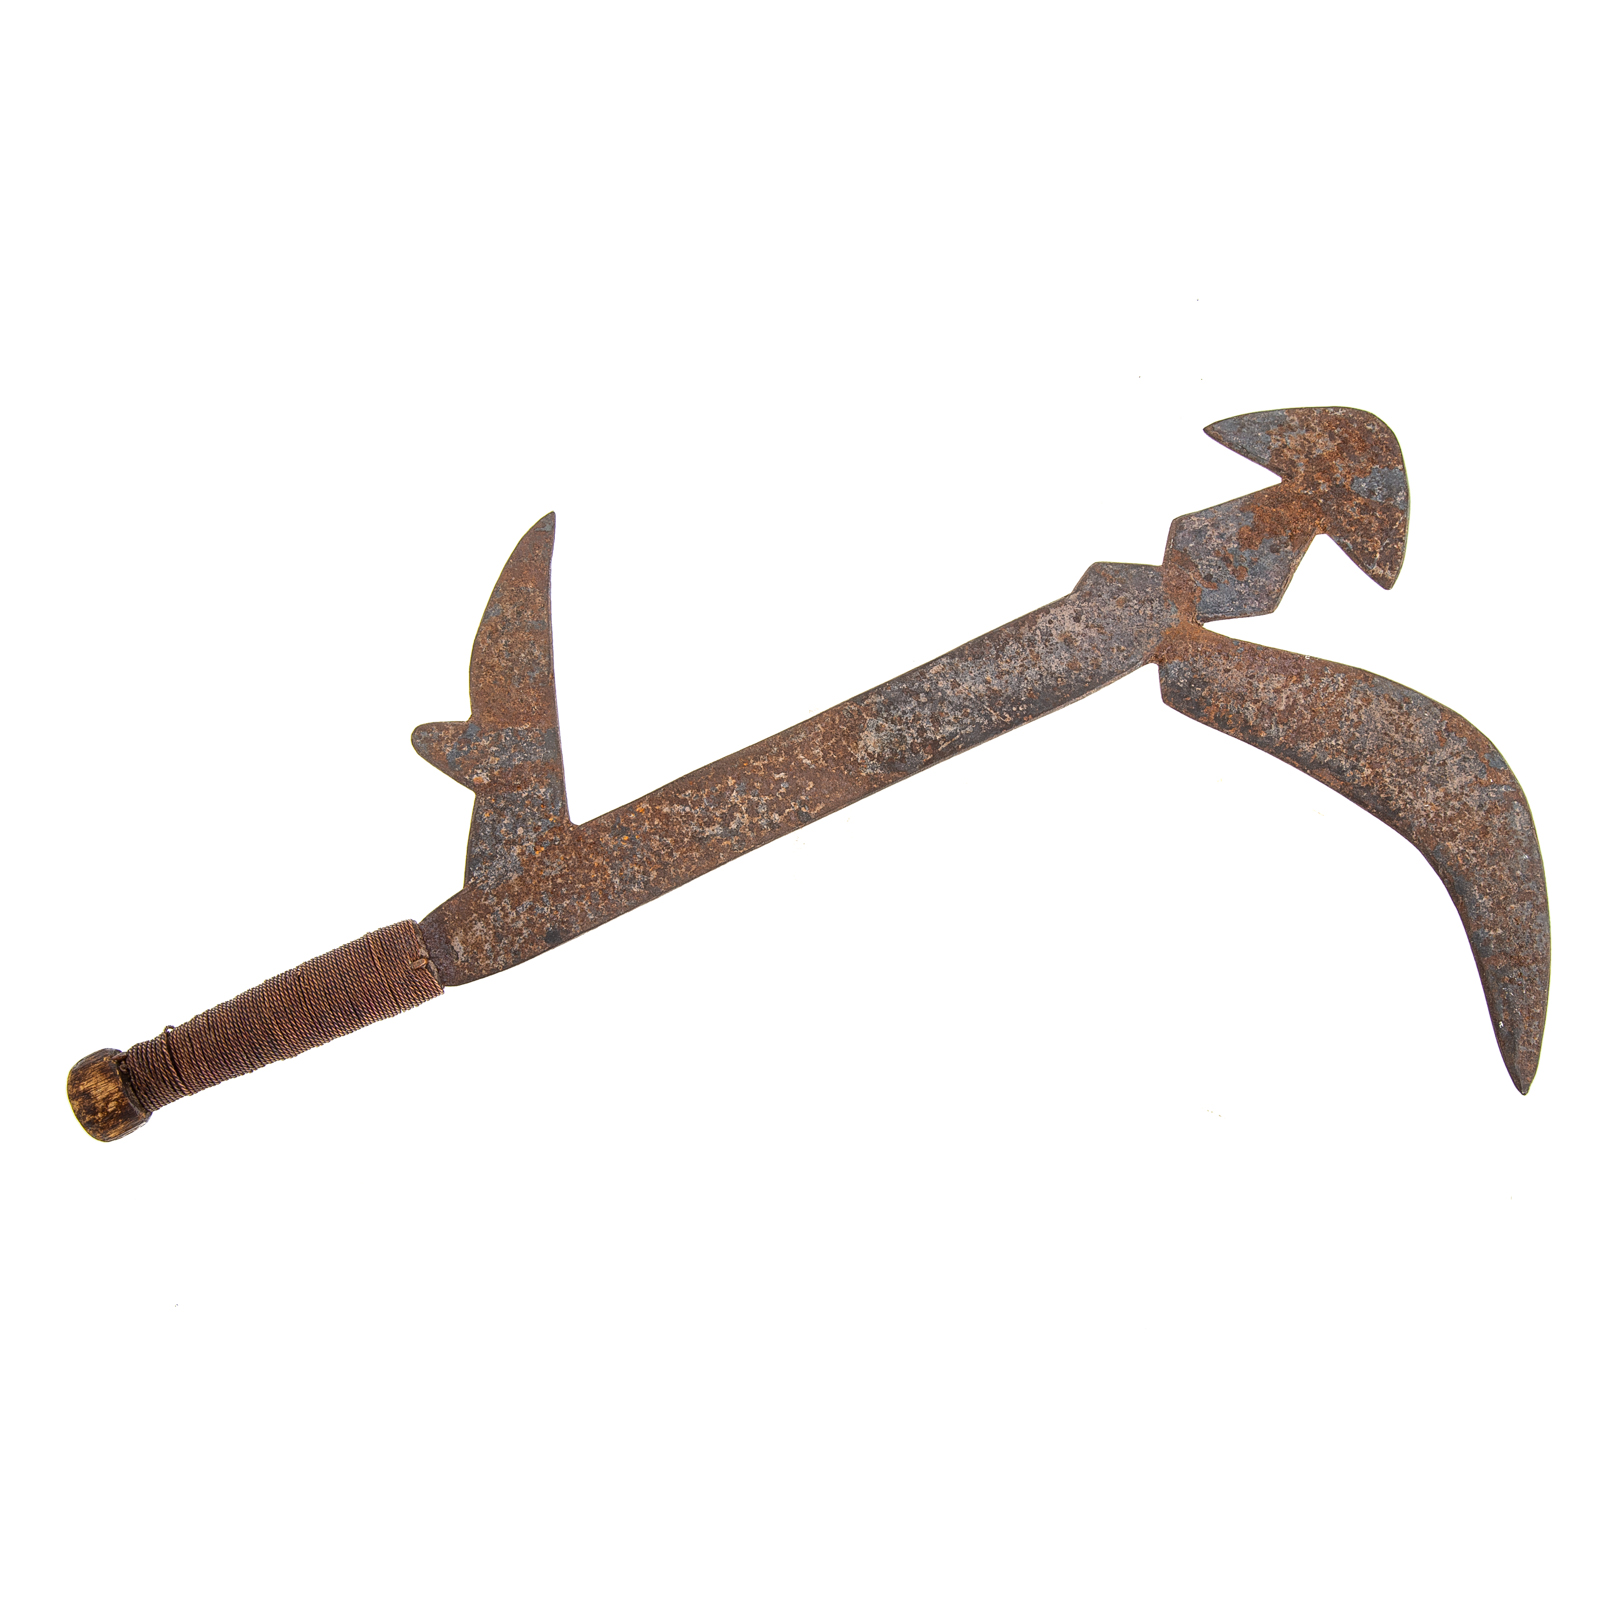 AFRICAN FORGED IRON THROWING SWORD